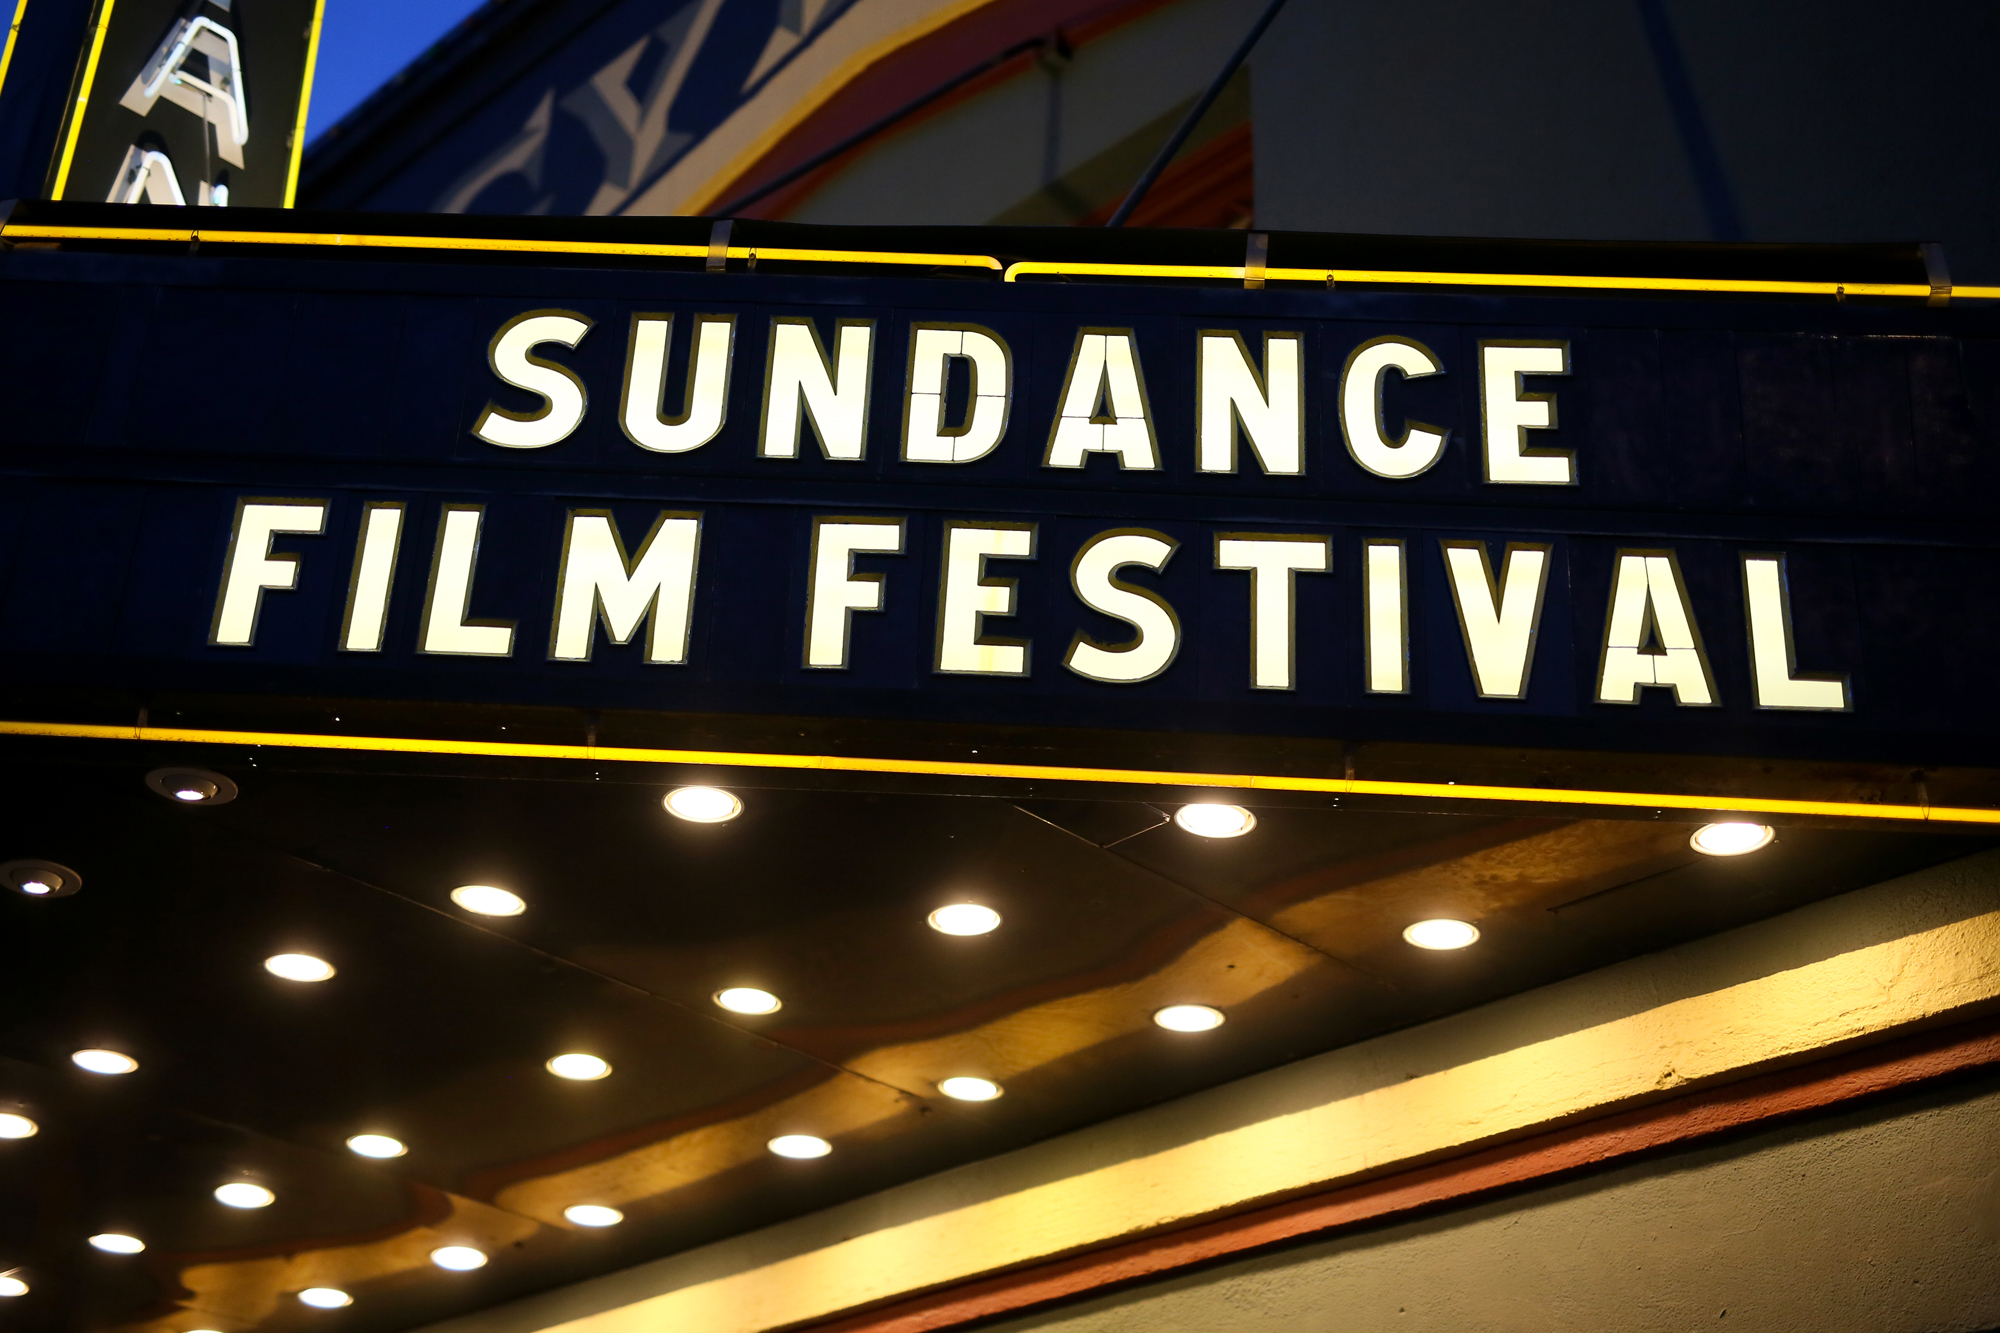 The Sundance Film Festival marquee at the Egyptian Theatre. Photo provided by the Sundance Film Festival